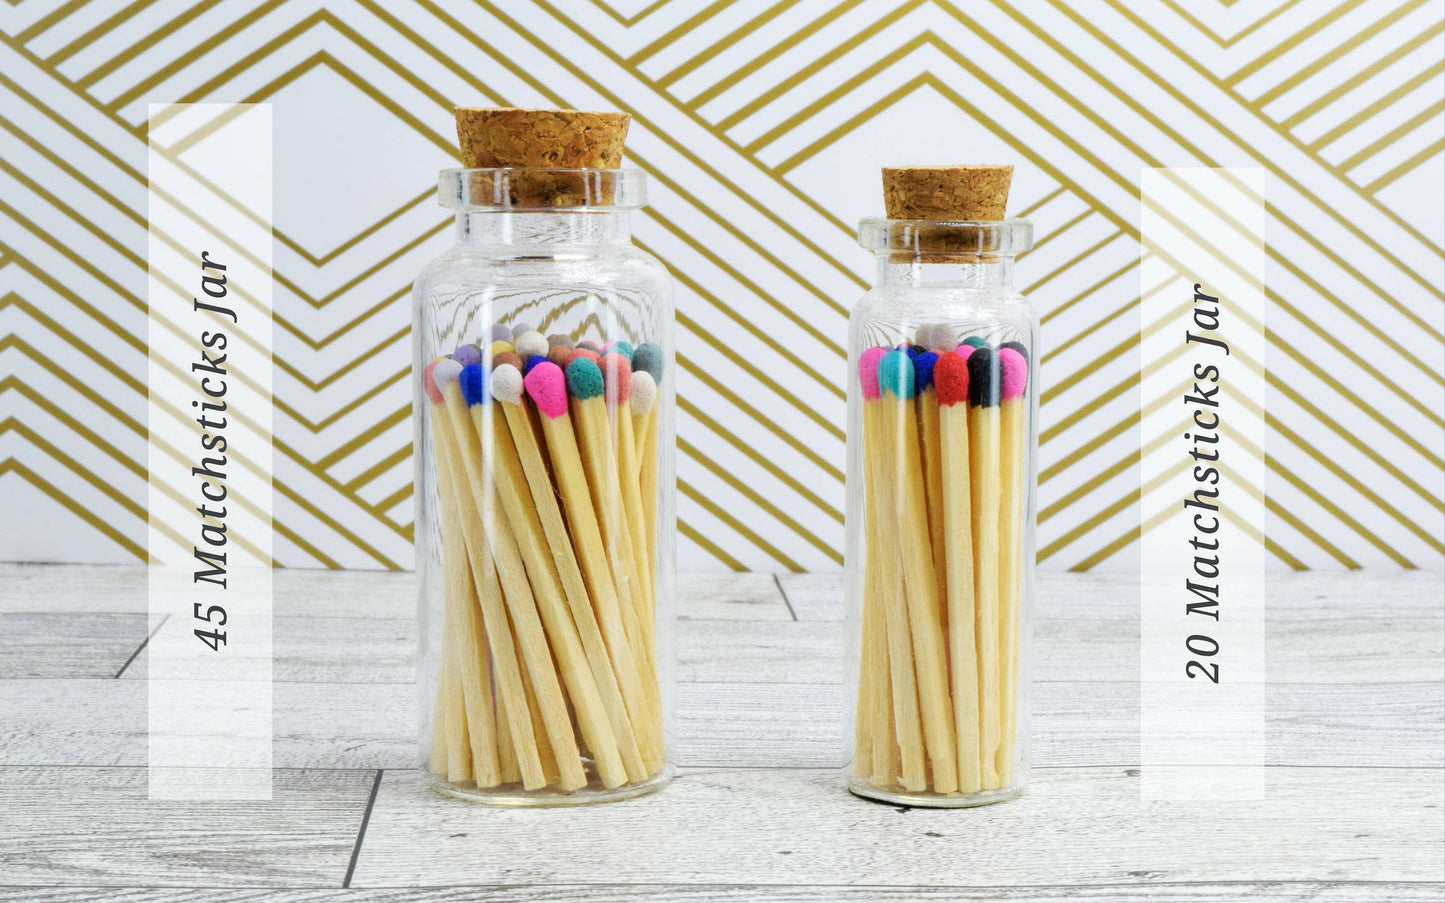 Small Match Bottles - Safety Matches in Jars with Striker: 40 Matchsticks Jar / Charcoal